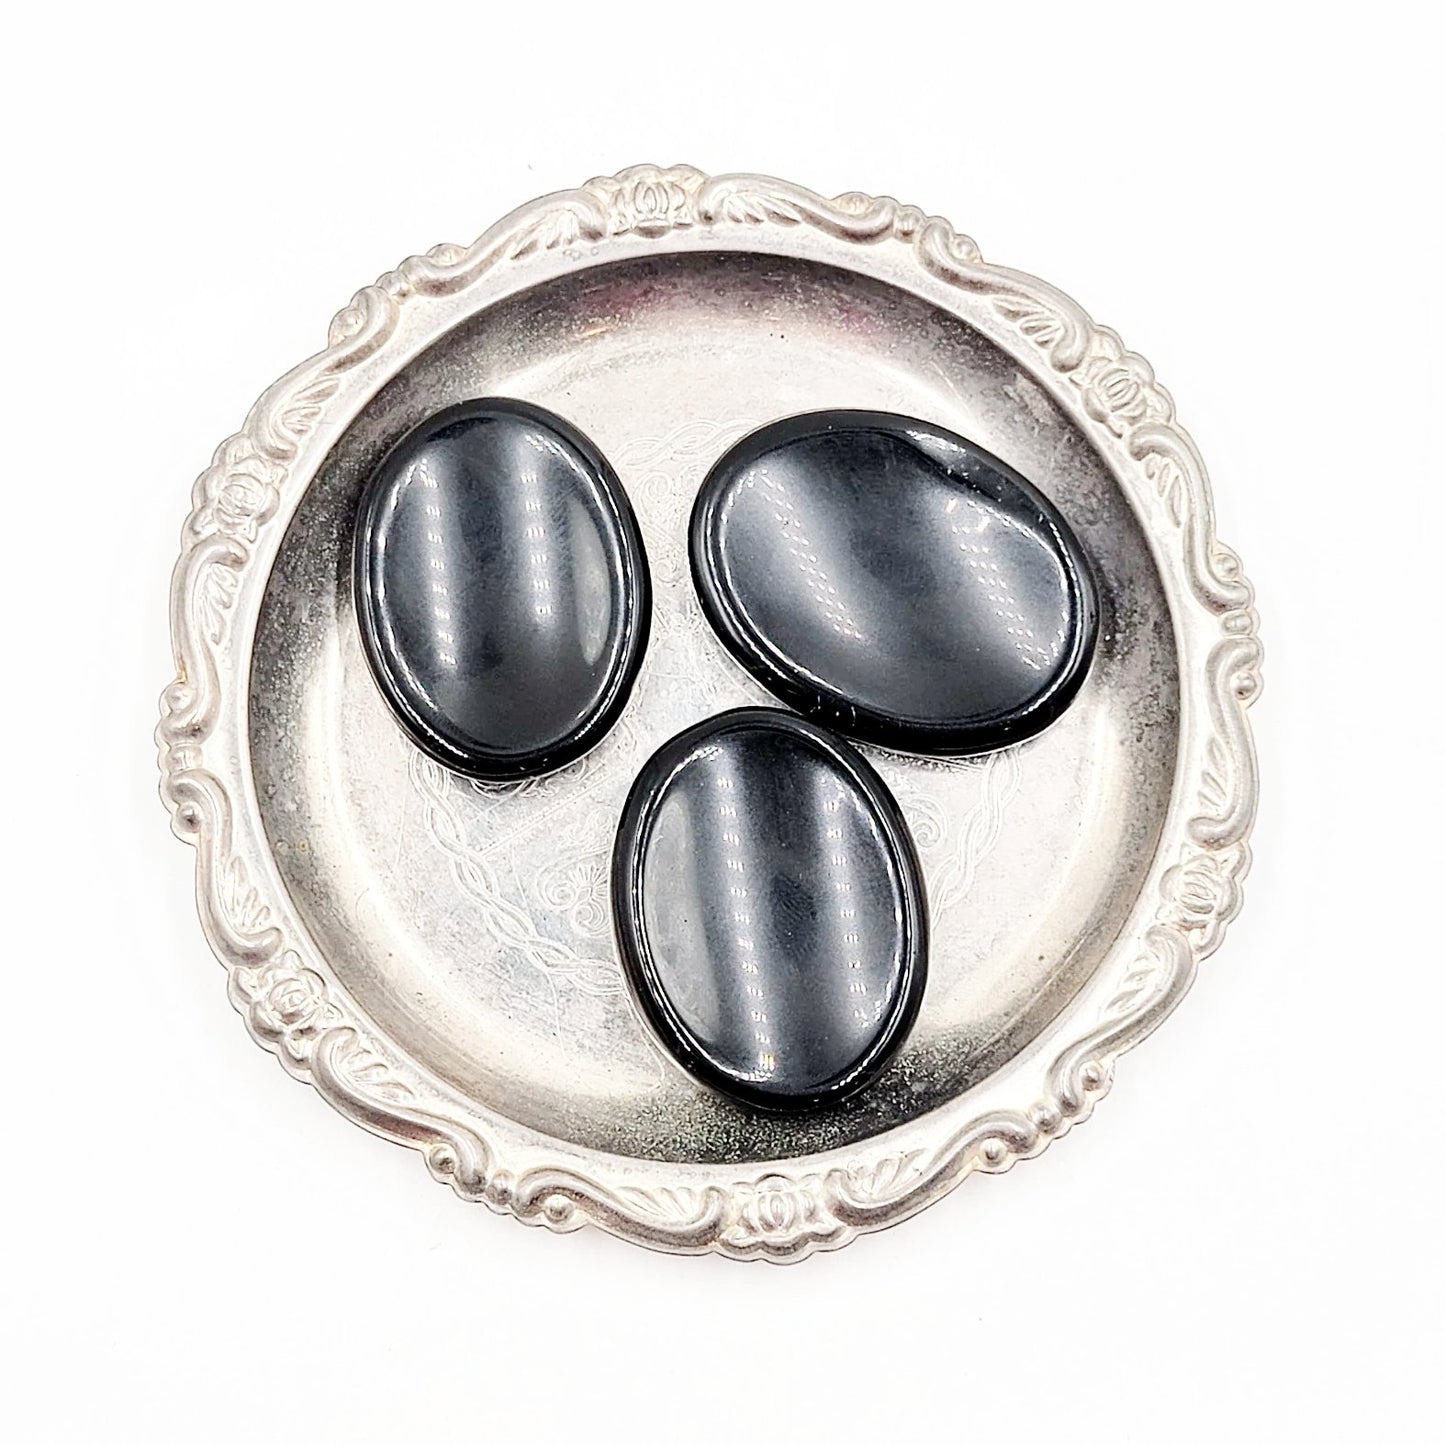 Black Obsidian Worry Stone Smooth Stone - Elevated Metaphysical